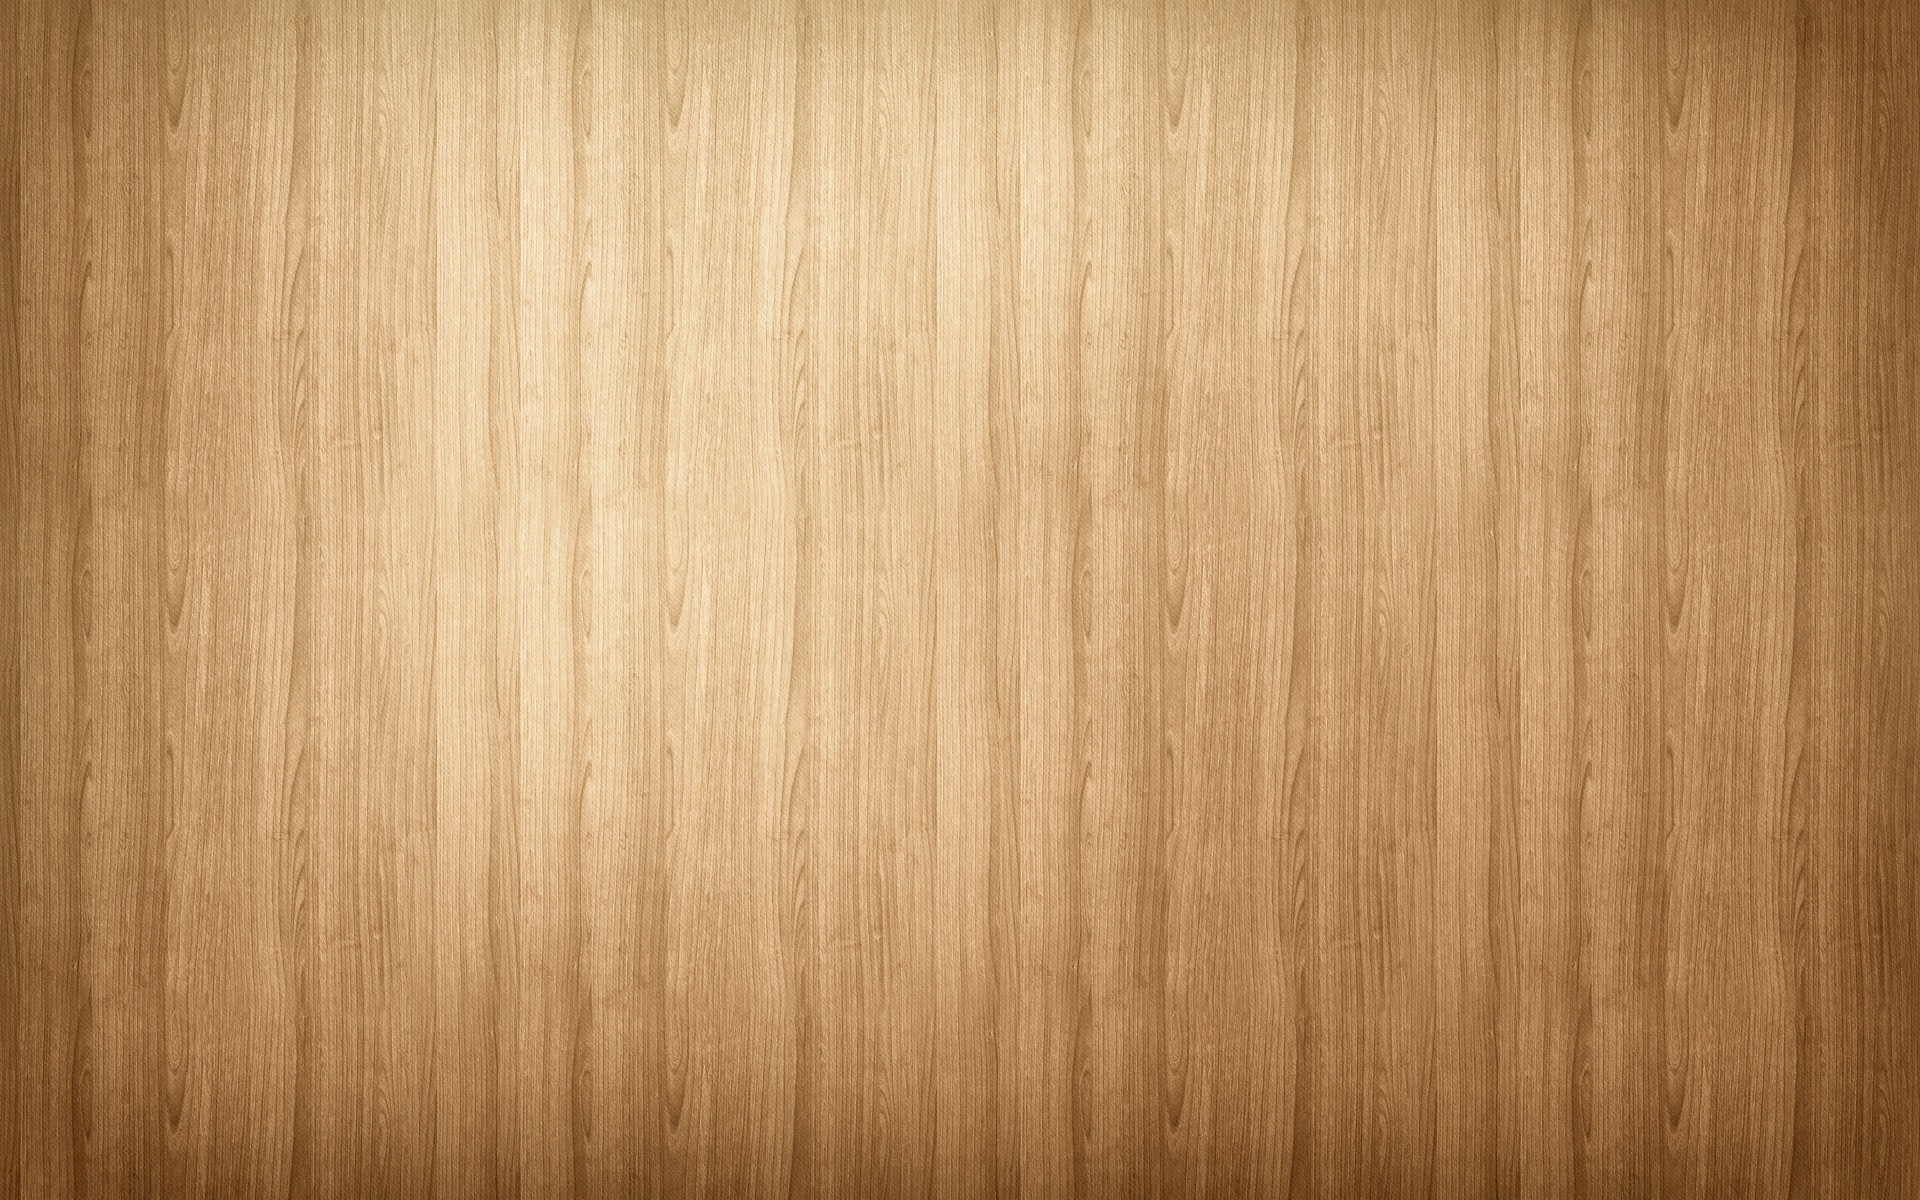 Is Using A Slightly Modified Version Of The Wood Floors Wallpaper